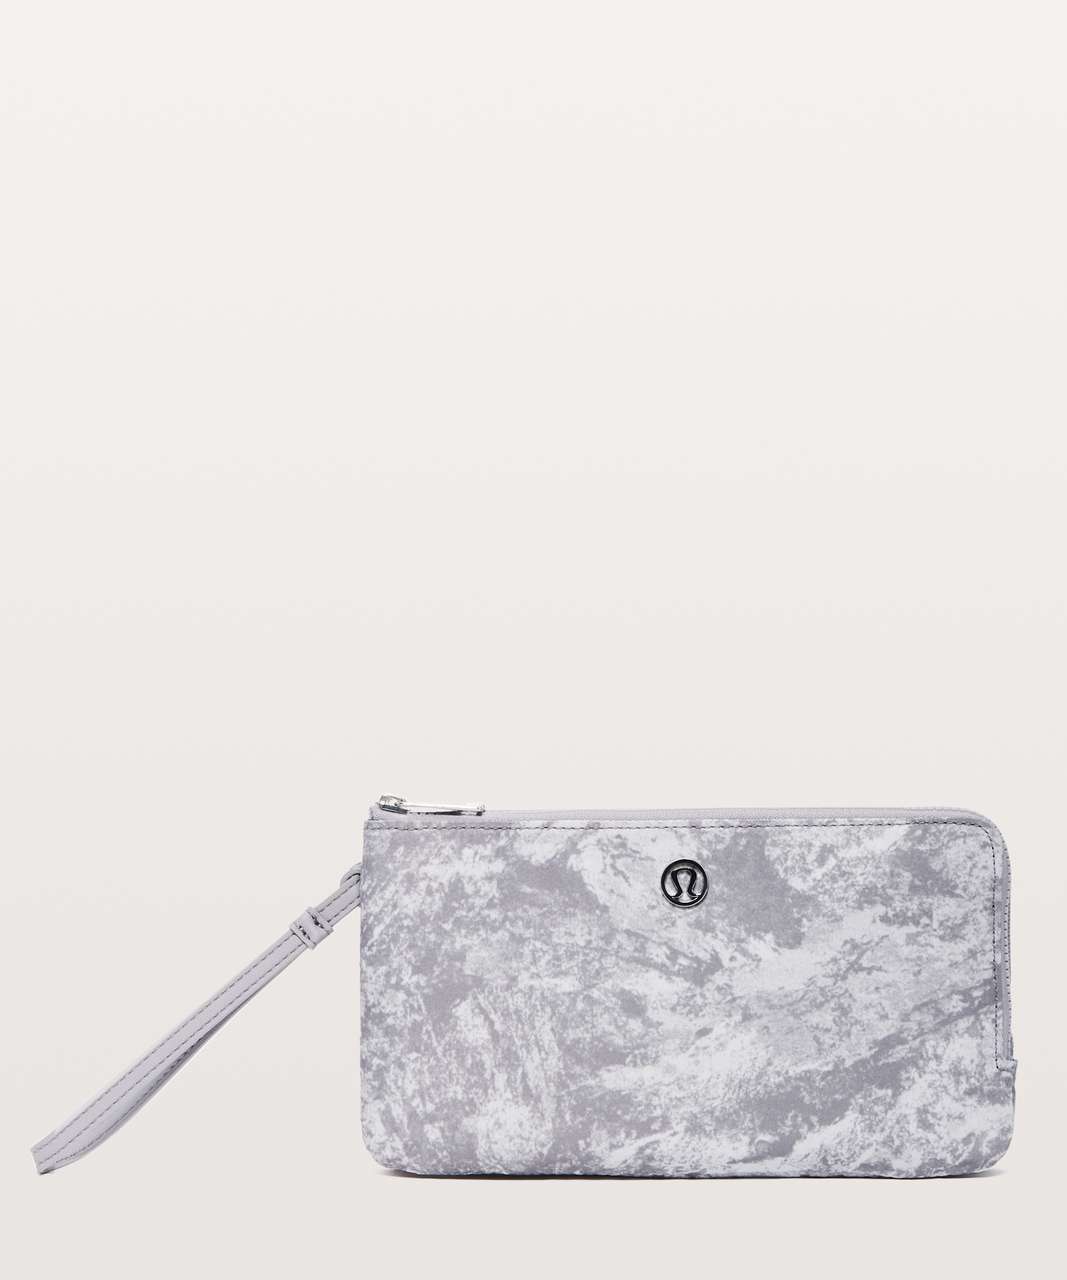 Lululemon Double Up Pouch - Washed Marble Alpine White Silverscreen